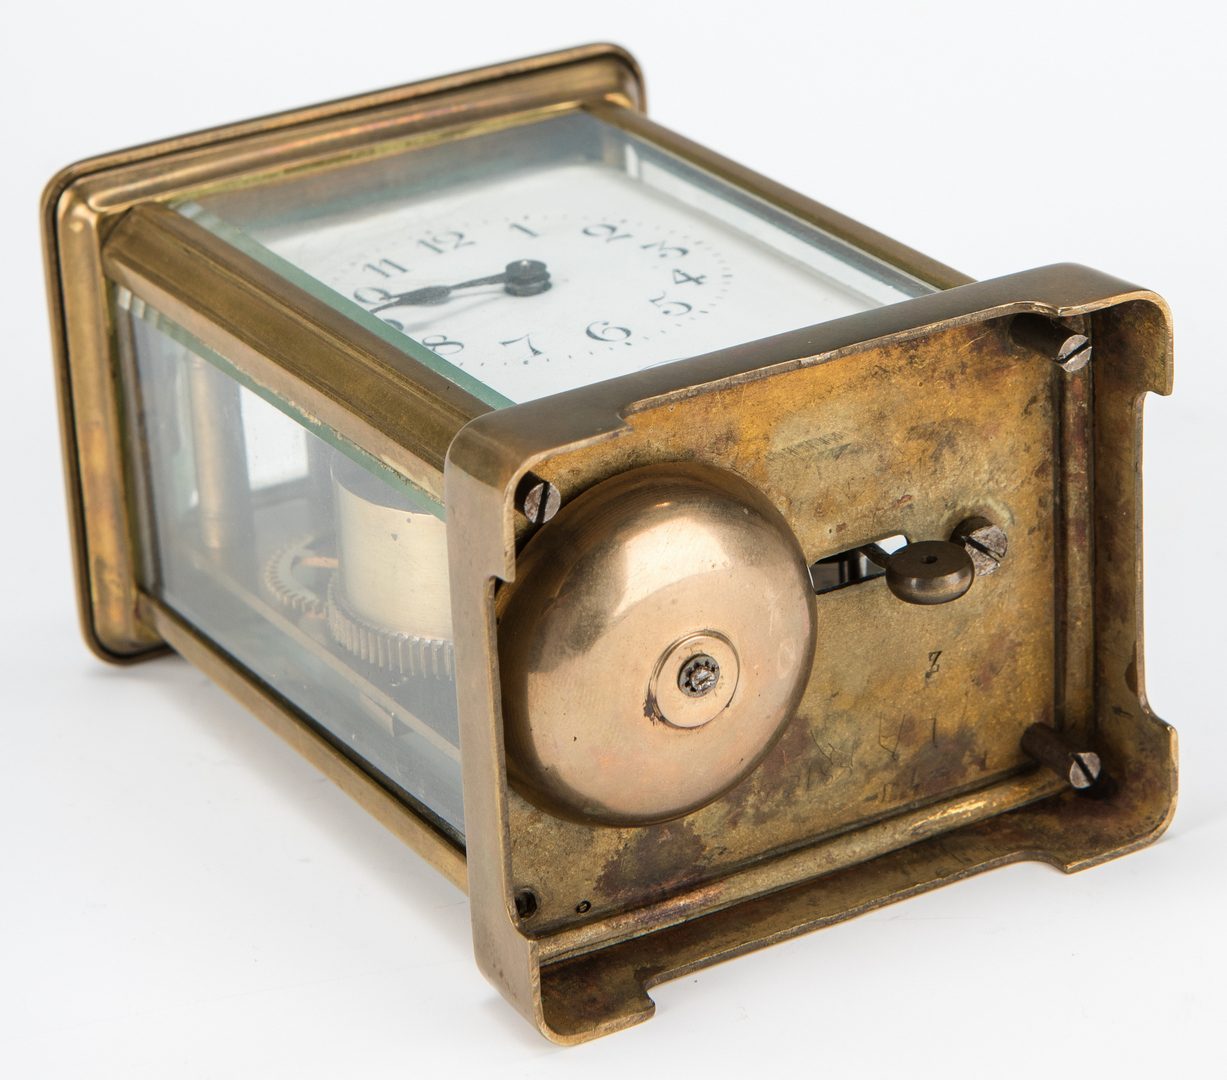 Lot 380: 2 Brass Carriage Clocks with Alarms